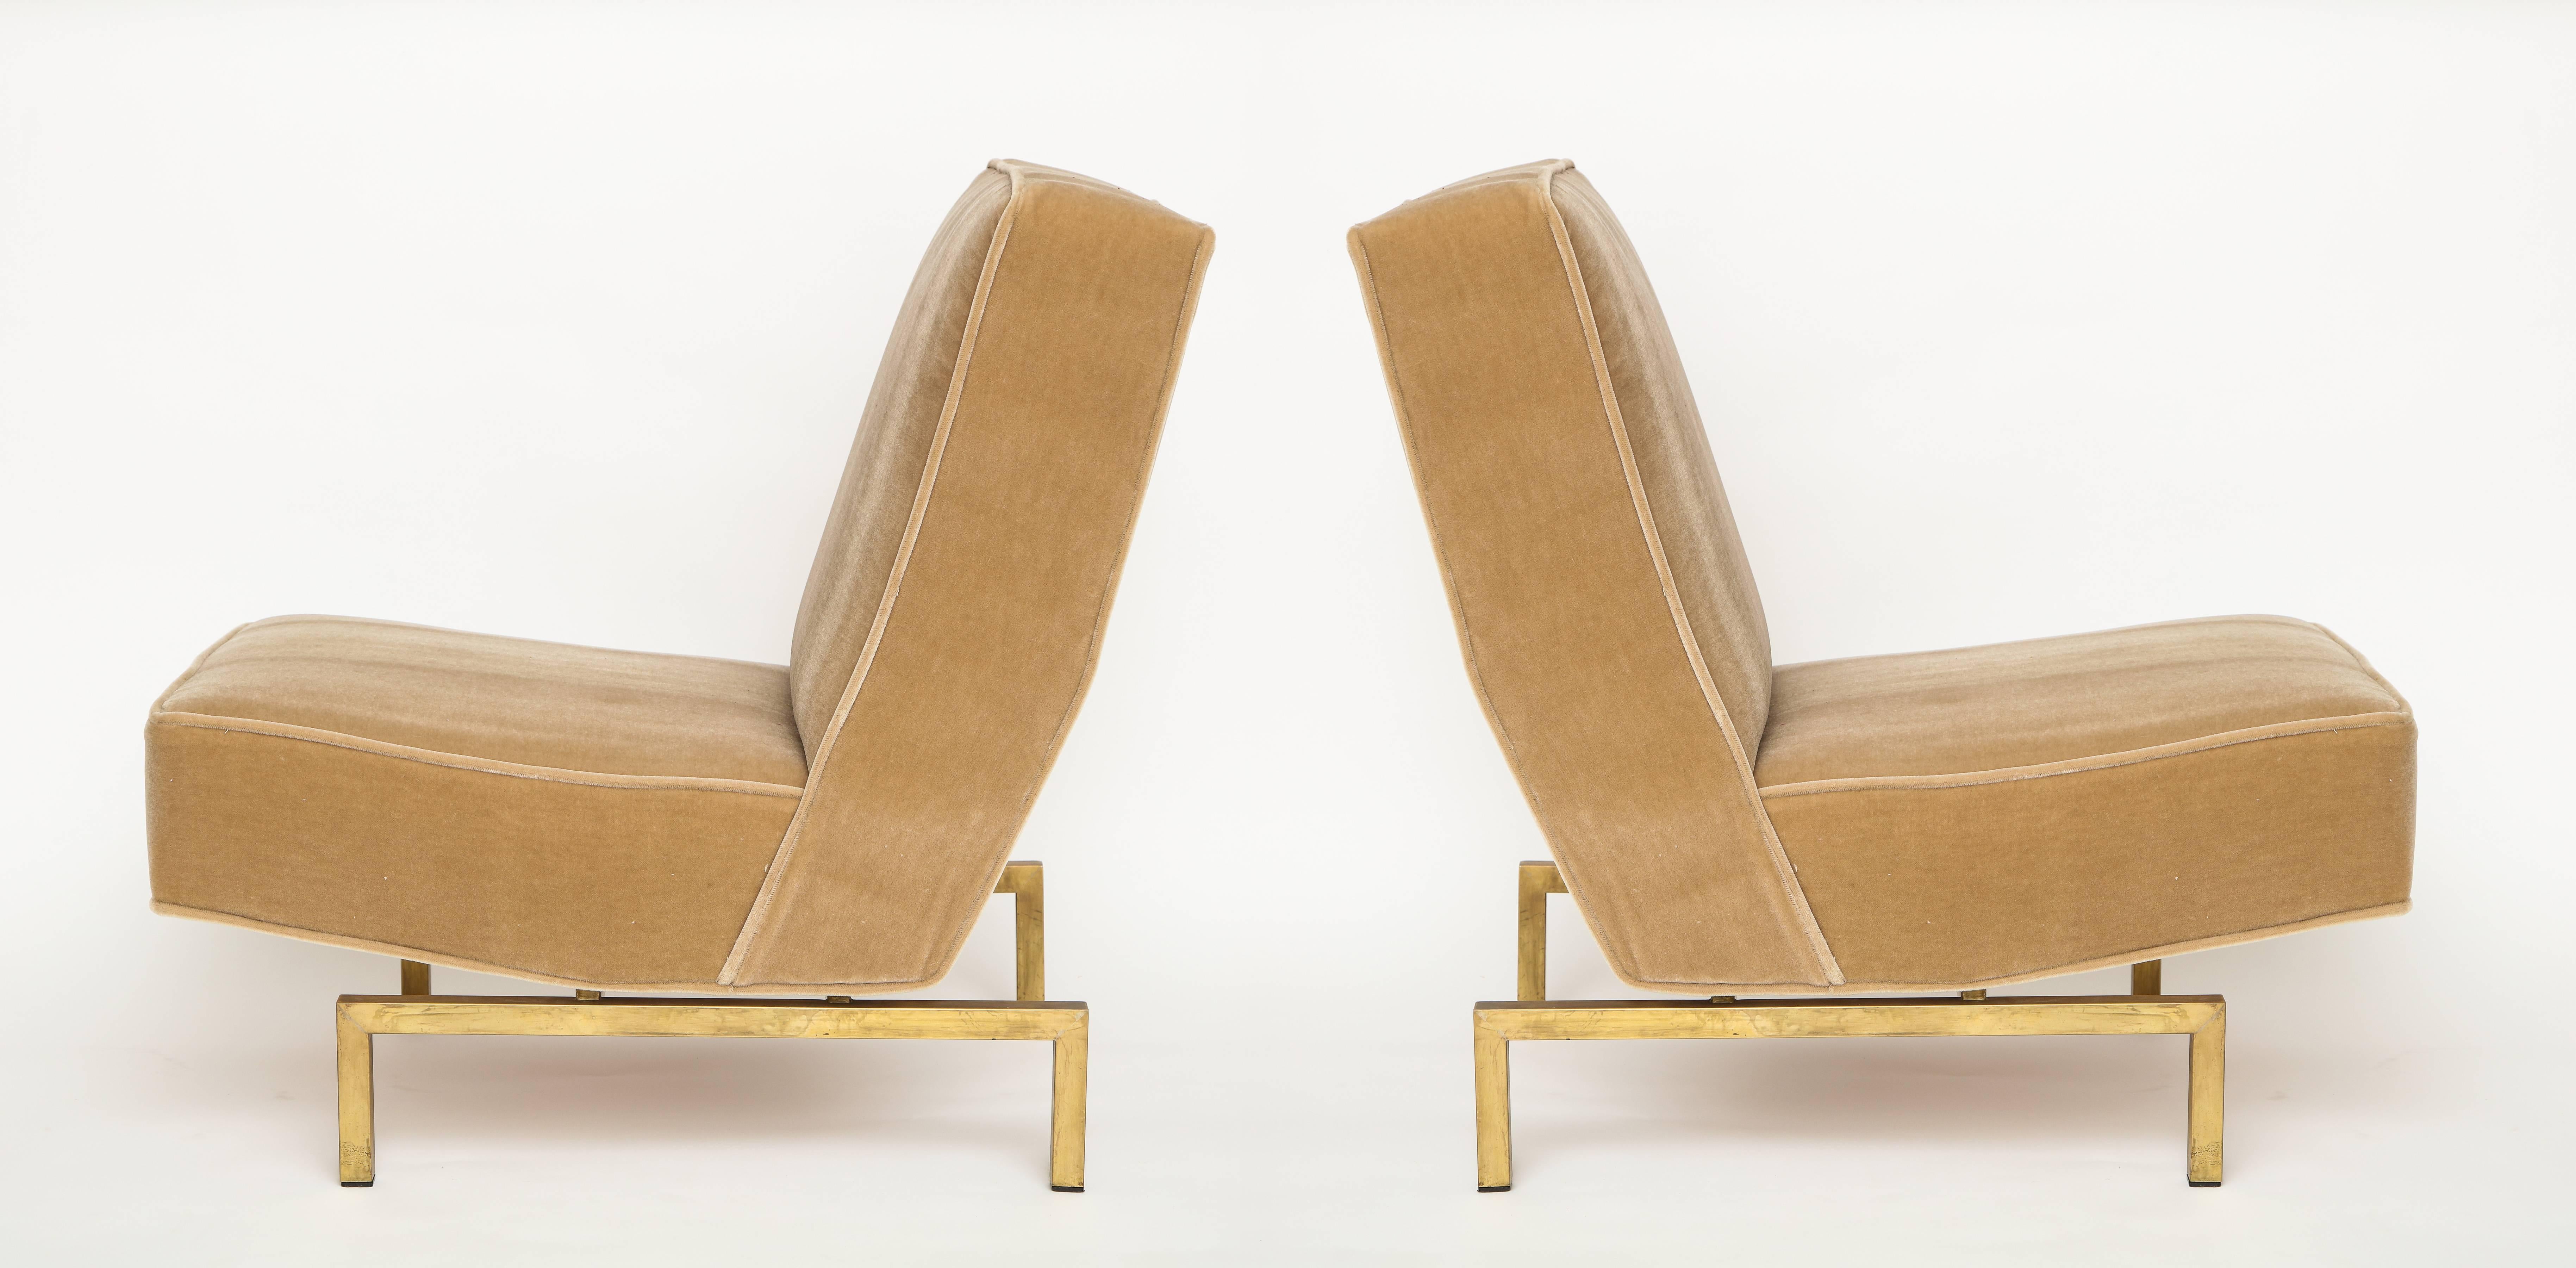 Louis Paolozzi green Mid-Century lounge chairs on brass bases, France, 1950s
Beautiful Louis Paolozzi newly upholstered lounge chairs on brass bases in a beige velvet.
Extremely comfortable. 
Louis Paolozzi was a designer in post war France